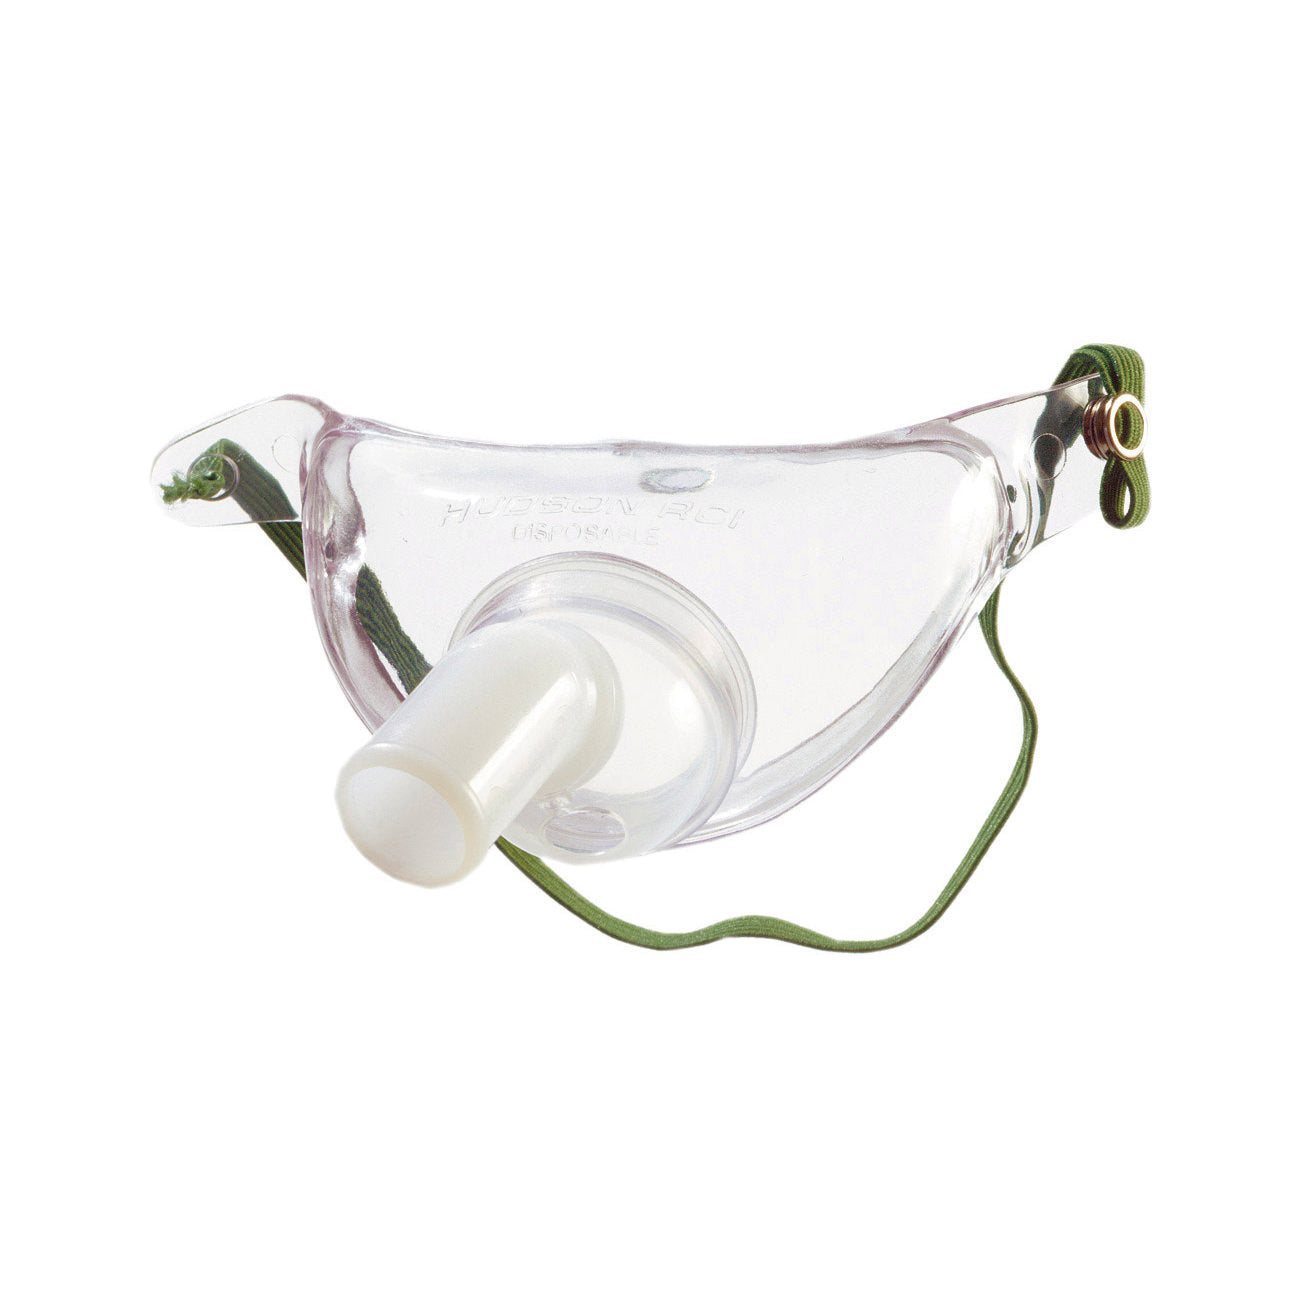 Pediatric or Adult Tracheotomy Mask (Case of 50)-Adult